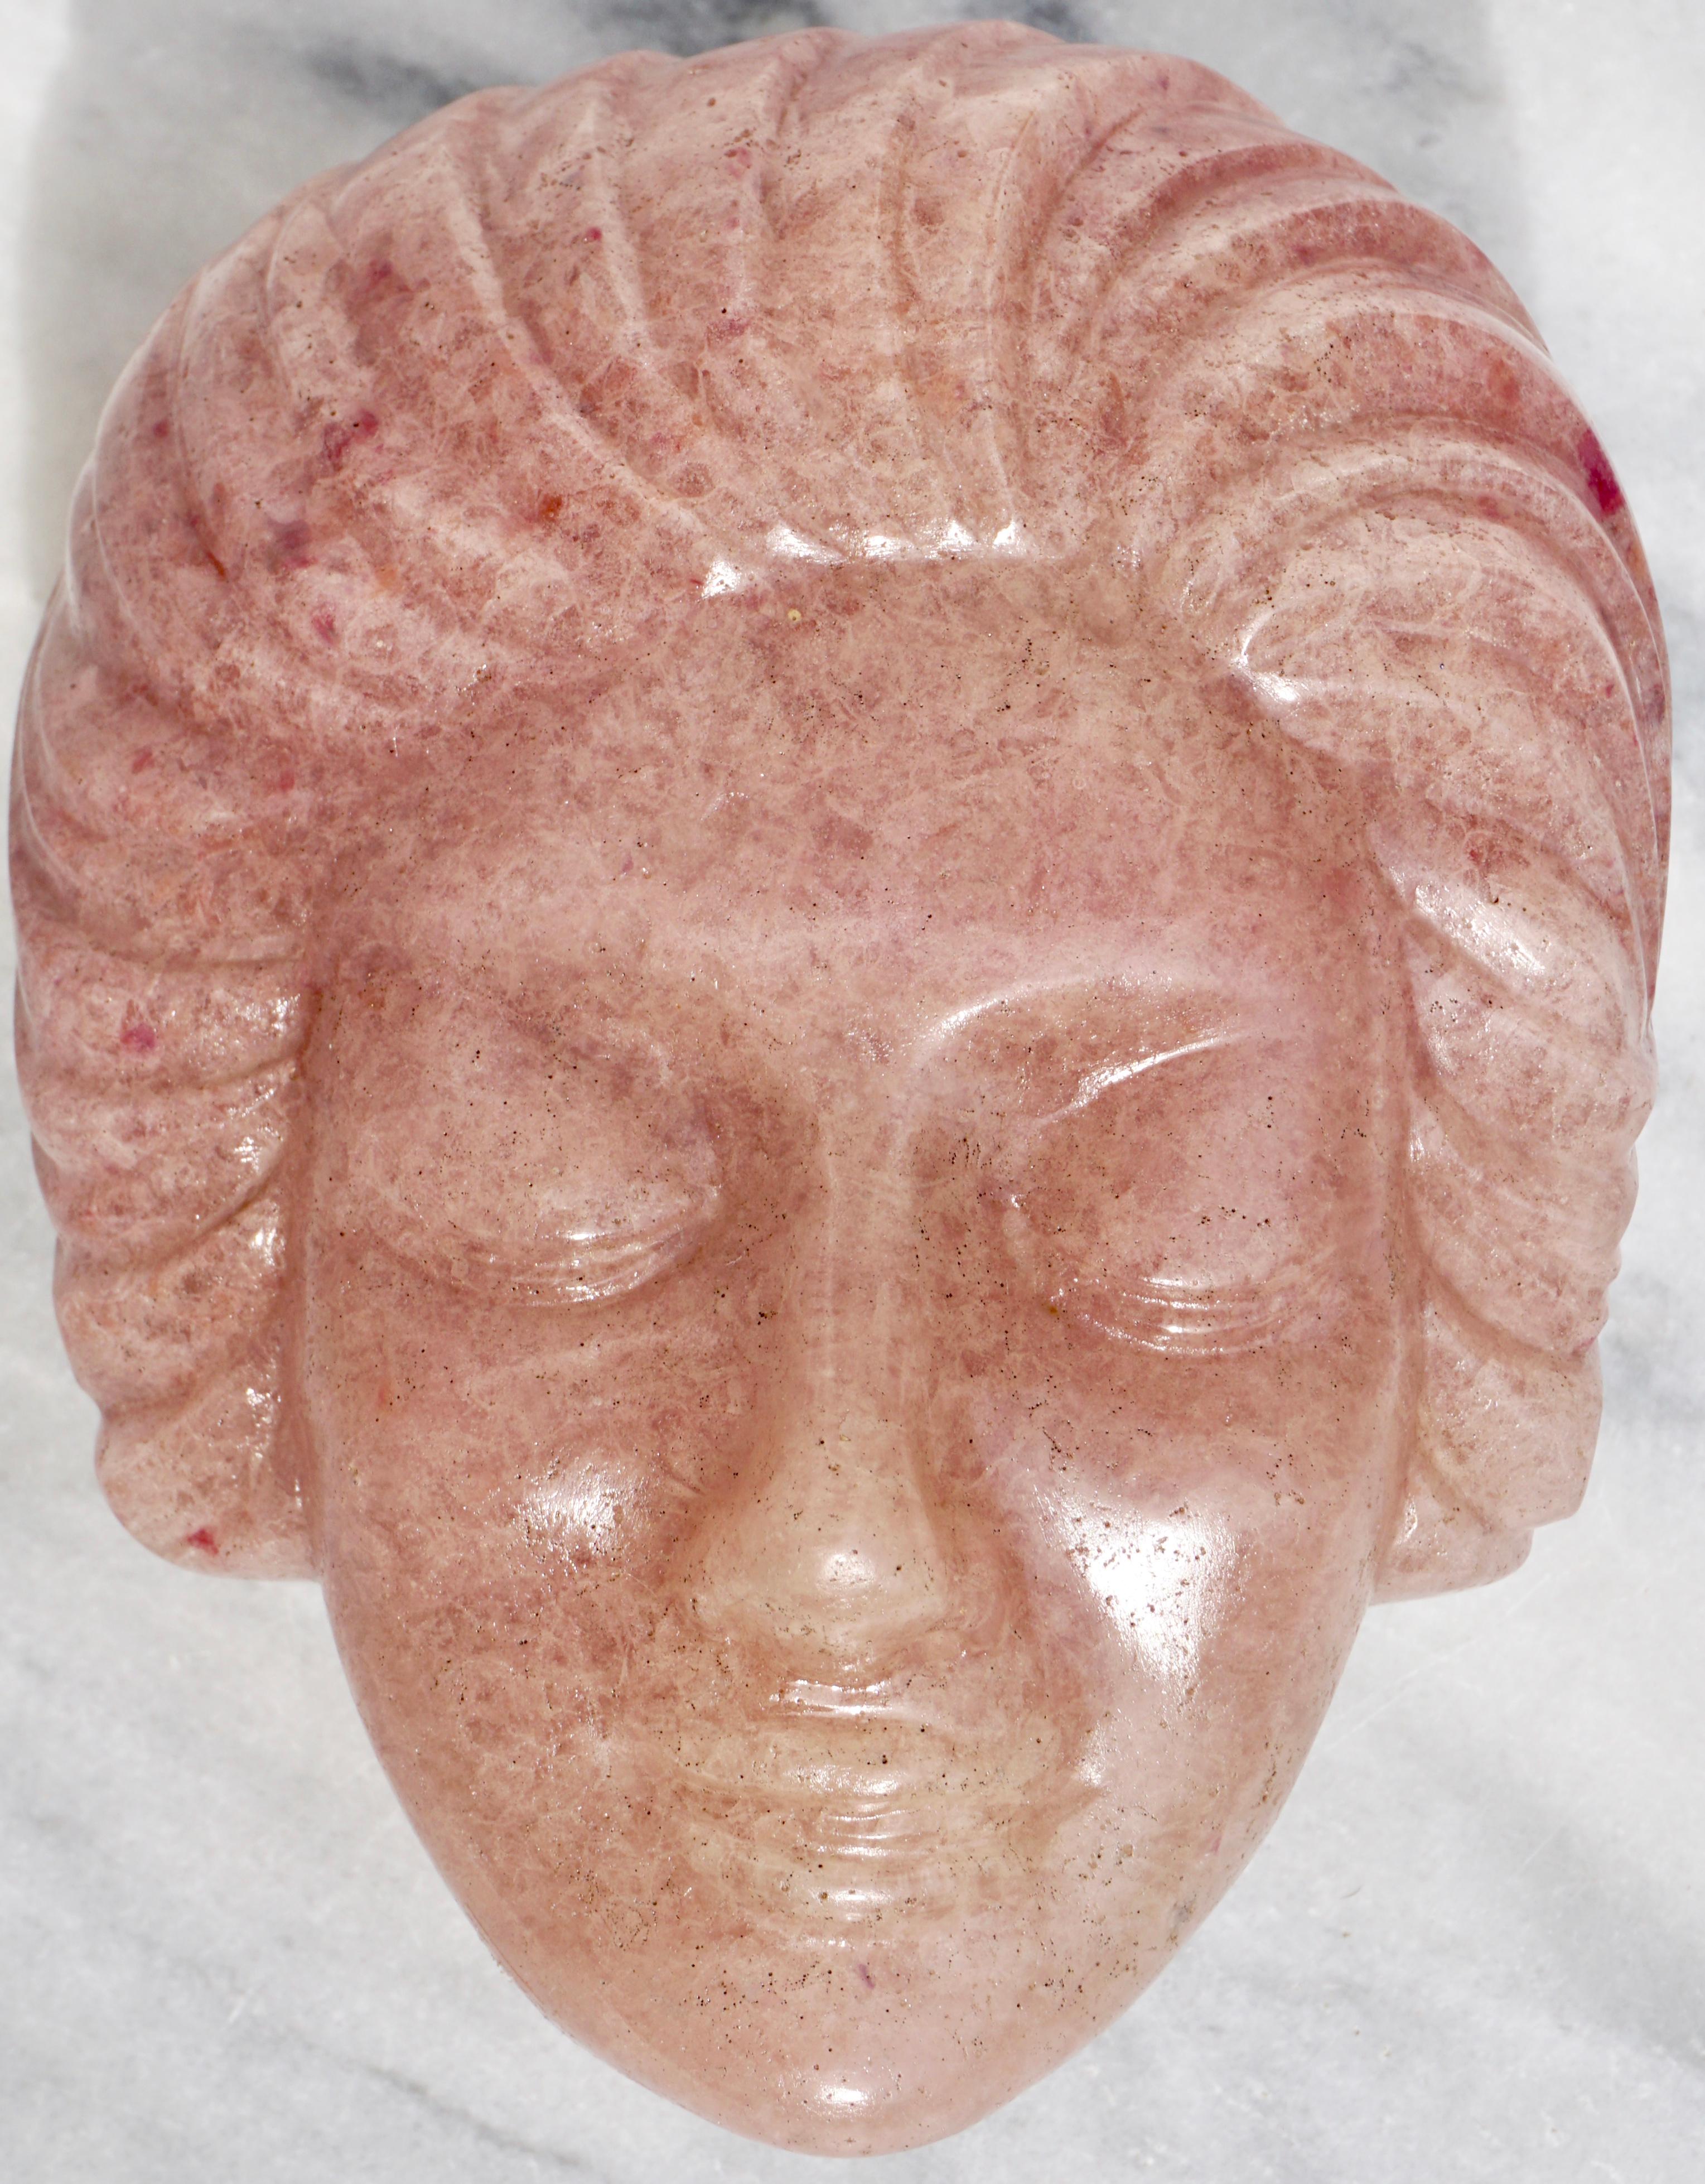 François-Emile Decorchemont Pate-de-Verre Glass Mold Of A Female Ladies Face. A rare, large and very heavy sculpture of either a mask or a modeled face. At 3.5 inches thick in glass with a peach, pink or rose color; this statue was exhibited in the